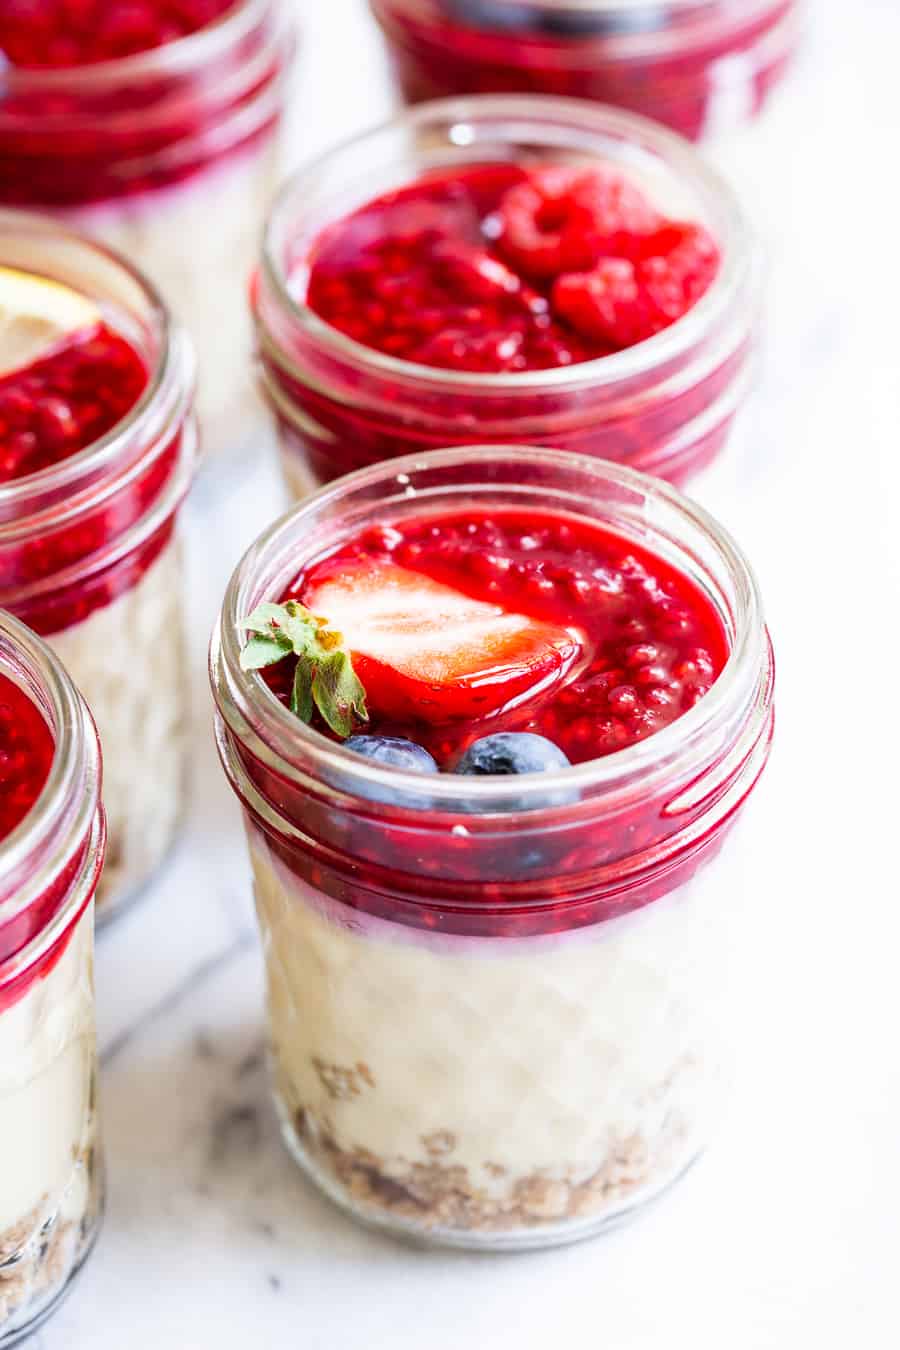 These fun single serve no bake cheesecake jars are made with real food ingredients and are completely dairy and soy free!  They’re perfect to make ahead of time for an easy and delicious healthy dessert you can grab anytime.  Kid friendly, paleo, vegan, and easy to make. #vegan #paleo #cheesecake #healthydessert